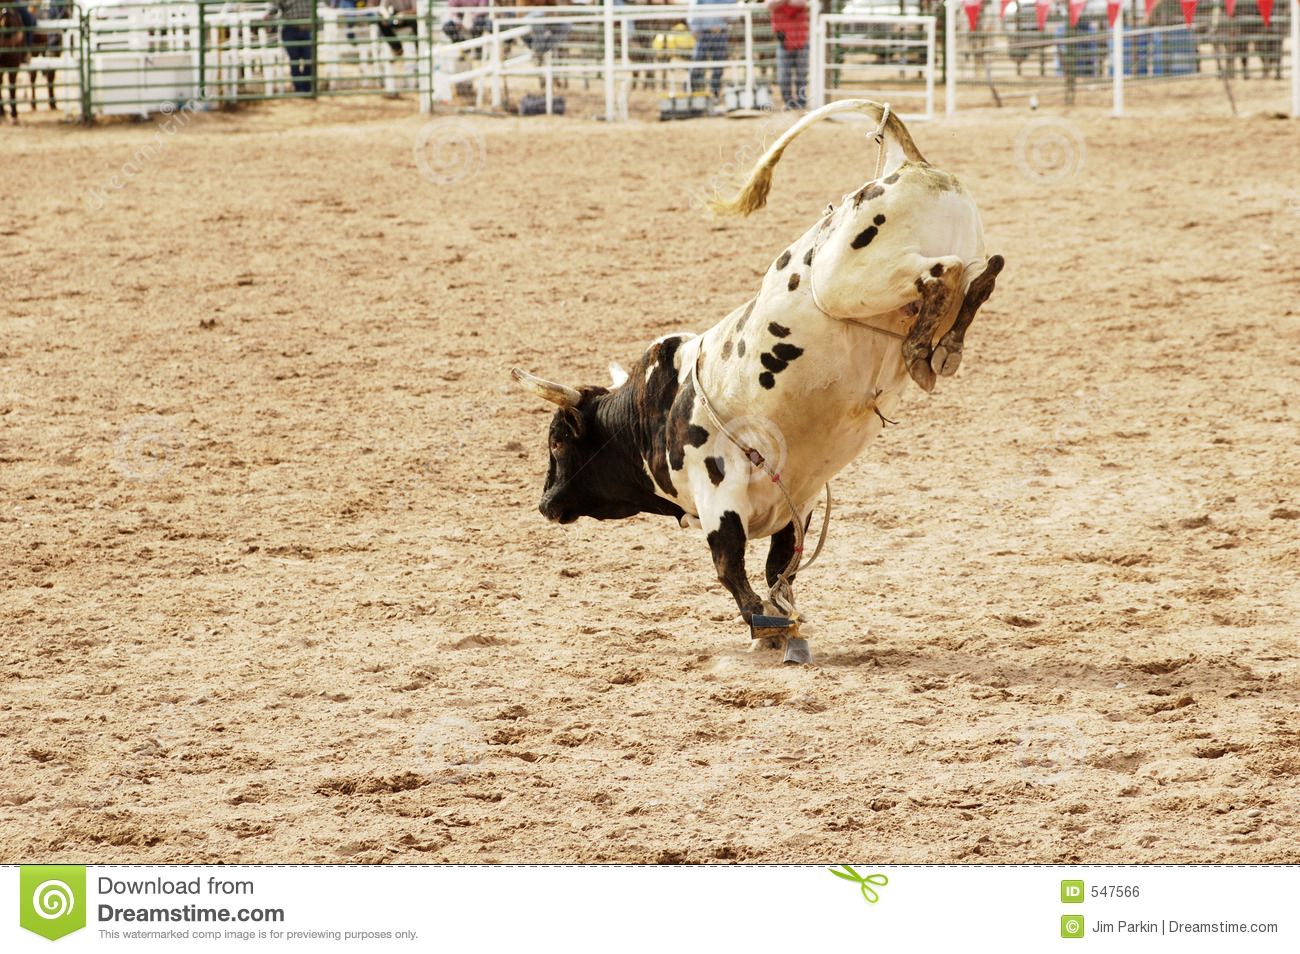 Rider Had Been Thrown During The Bull Rinding Competition At A Rodeo